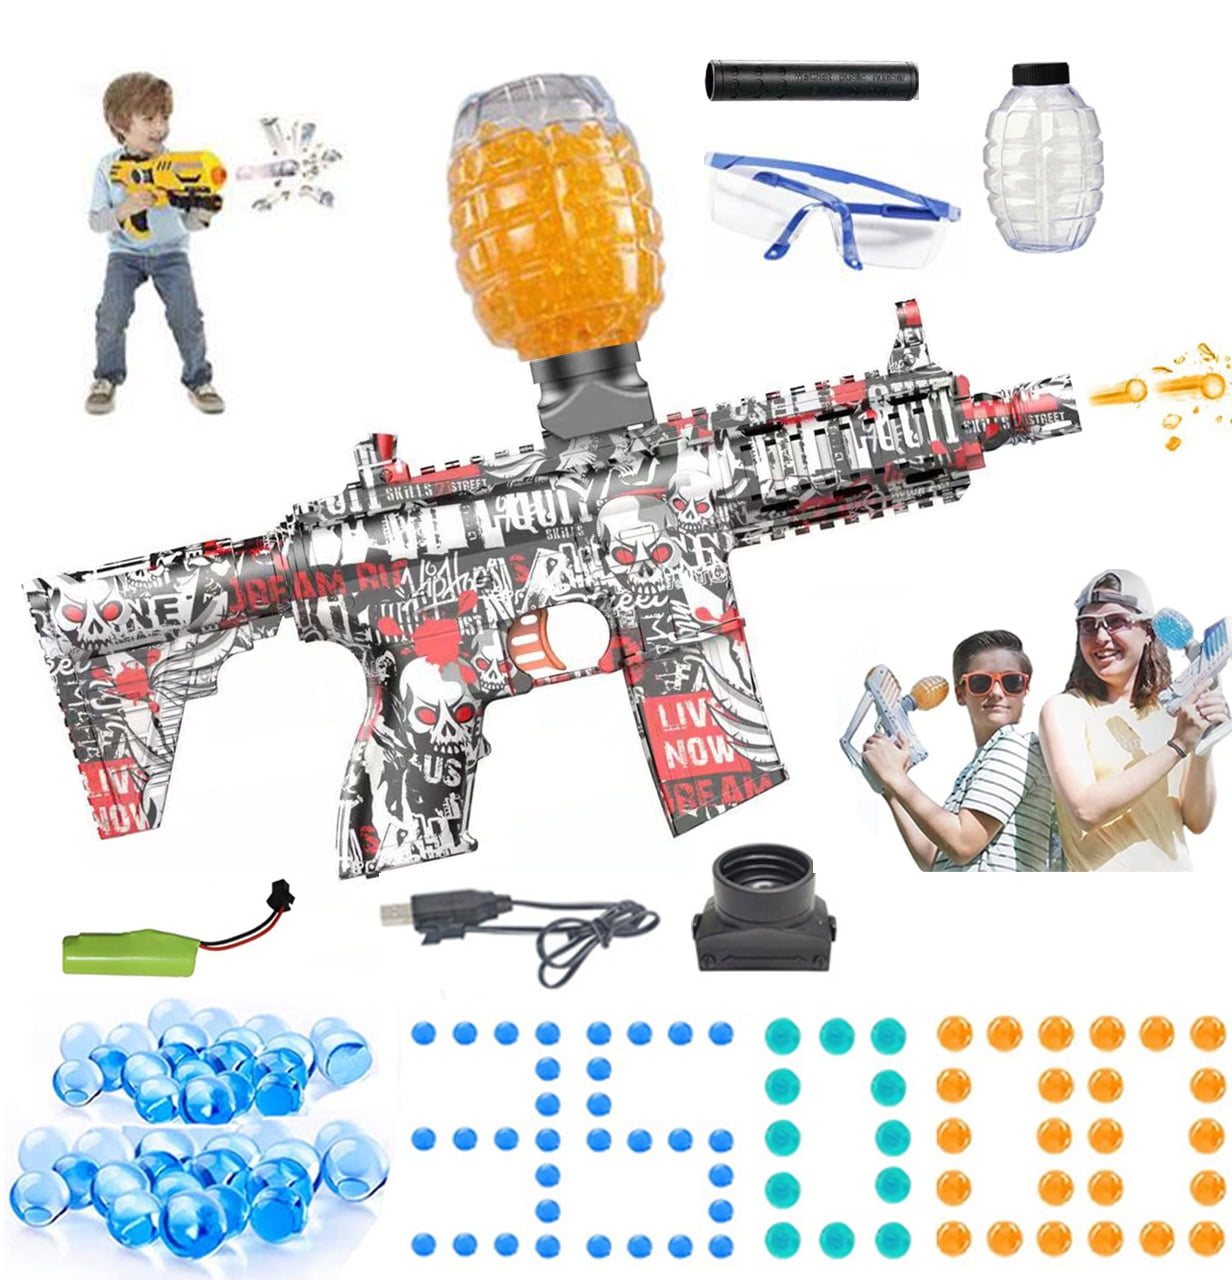 Electric with Gel Ball Blaster Toy Eco-Friendly M416 splatter ball Toy,35000 Water Beads (random color) for Outdoor Activities Team Game, Ages 12+